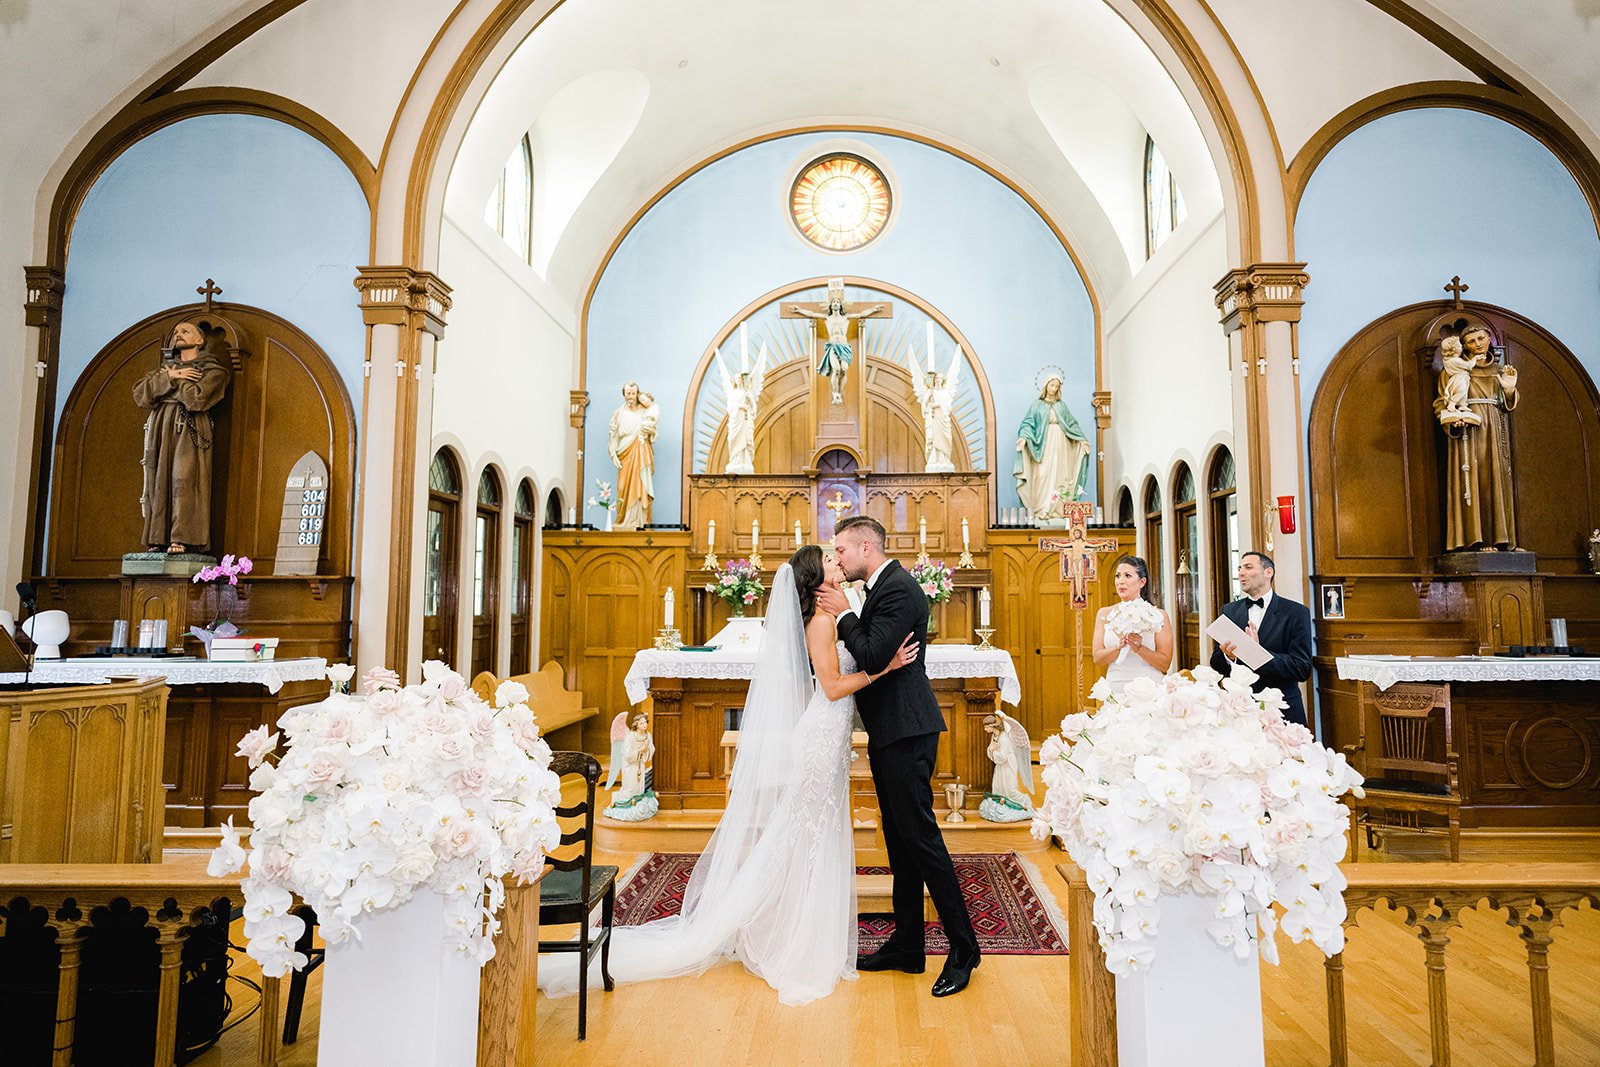 Couple shares first kiss in local catholic church in Vancouver Canada